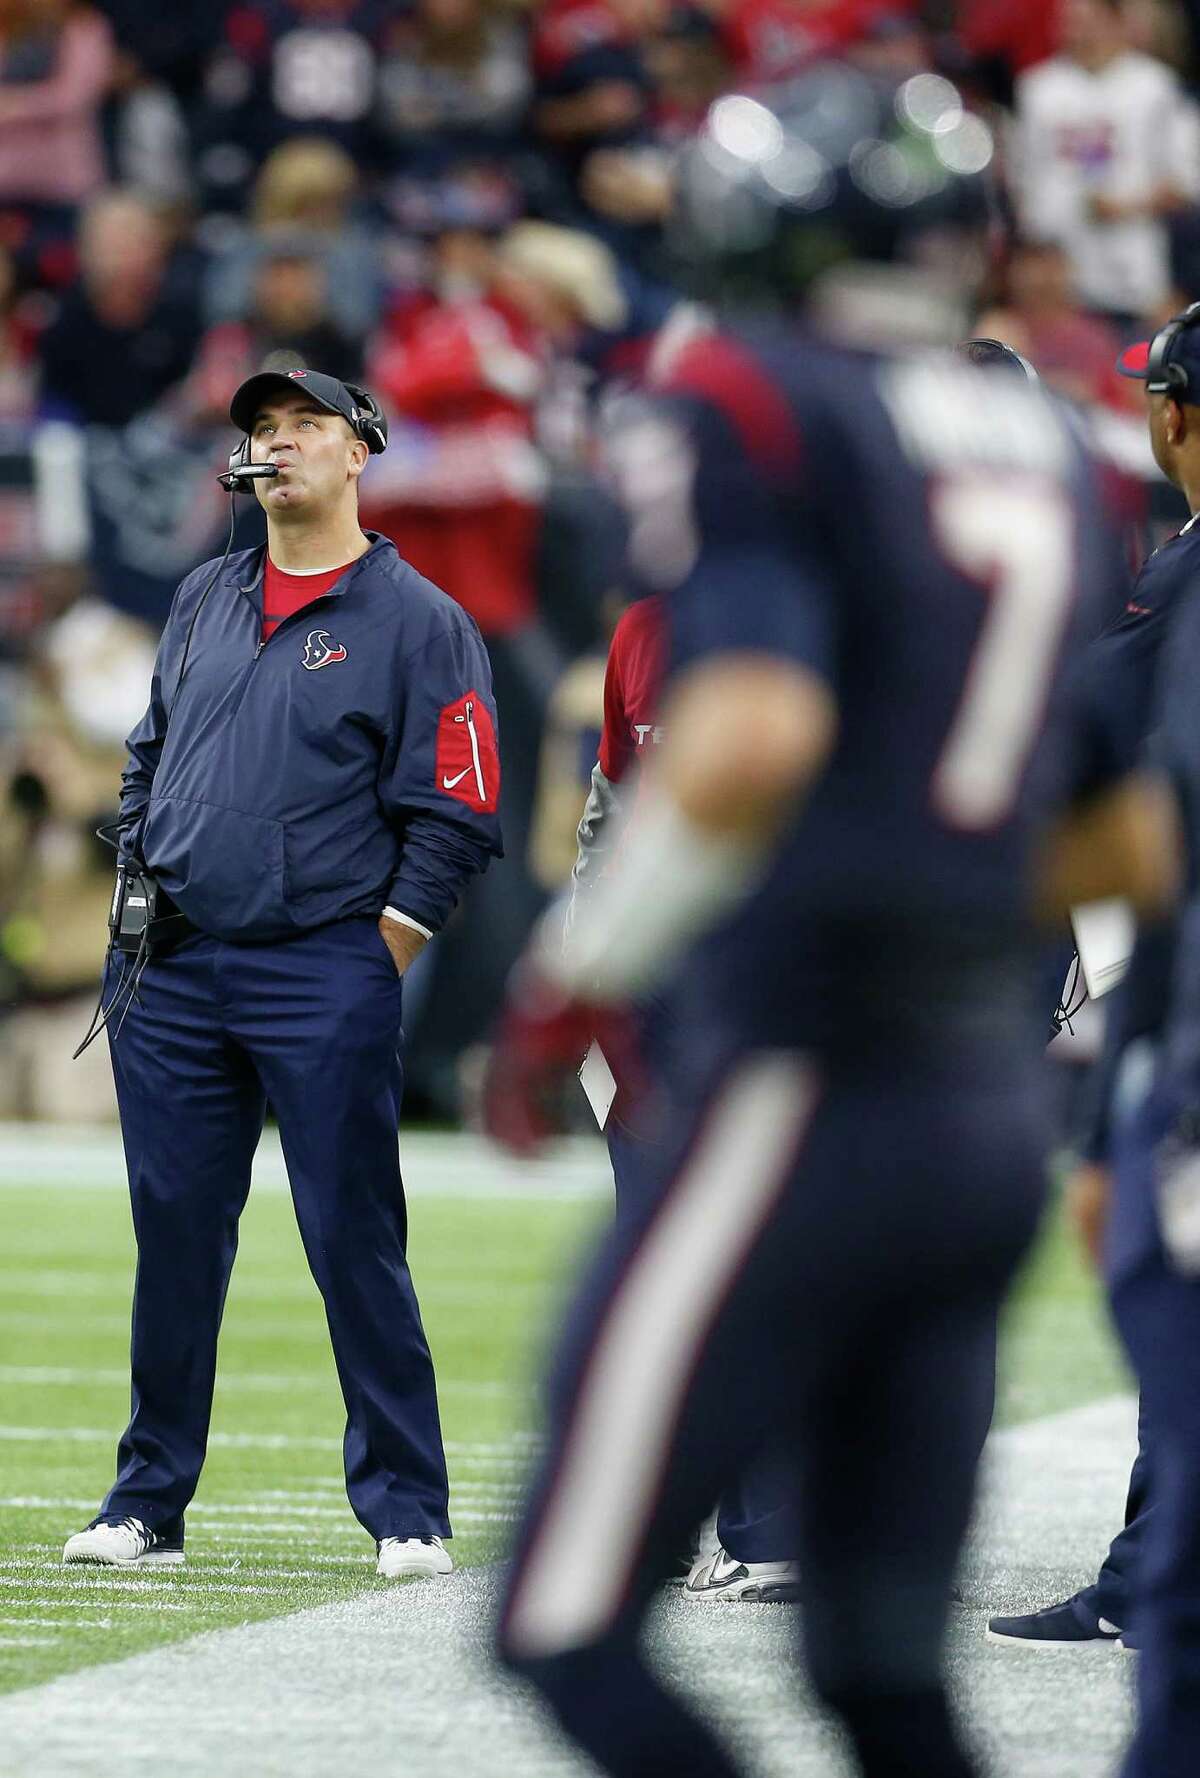 Perhaps the biggest point of contention in coach Bill O'Brien's ﻿play-calling during Saturday's wild-card loss to the Chiefs was his decision to use J.J. Watt to try to score from the 2-yard line off a direct snap from center. He lost a yard.